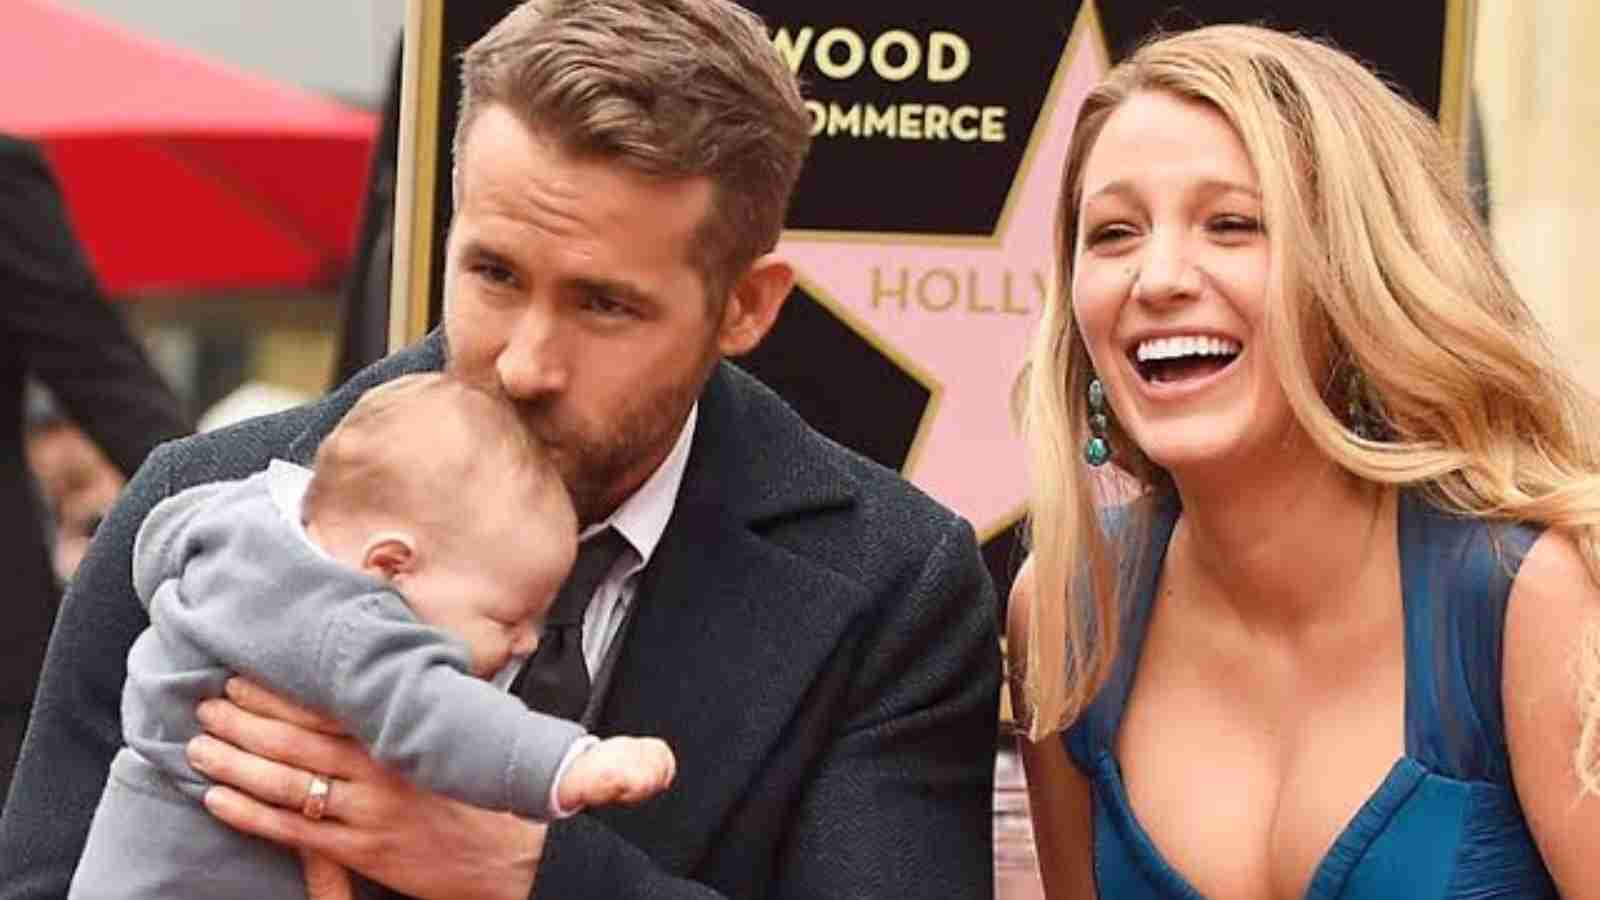 Ryan Reynolds and Blake Lively with their daughter Inez Reynolds